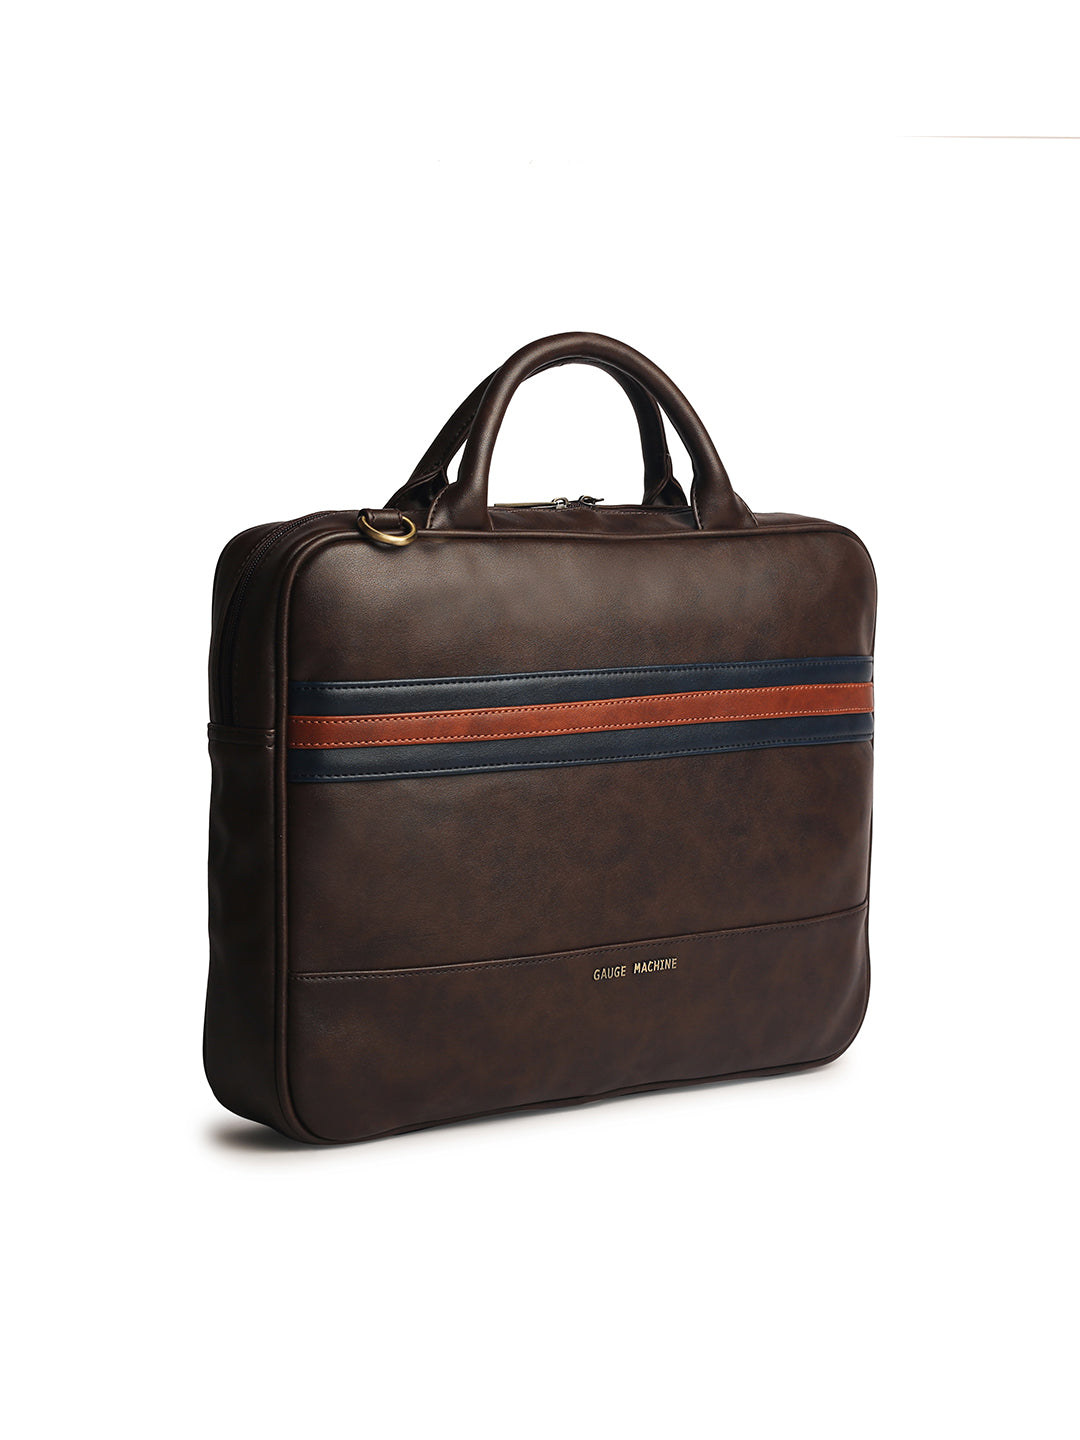 Gauge Machine 16" Brown Appointee Laptop Bag with Detachable Strap